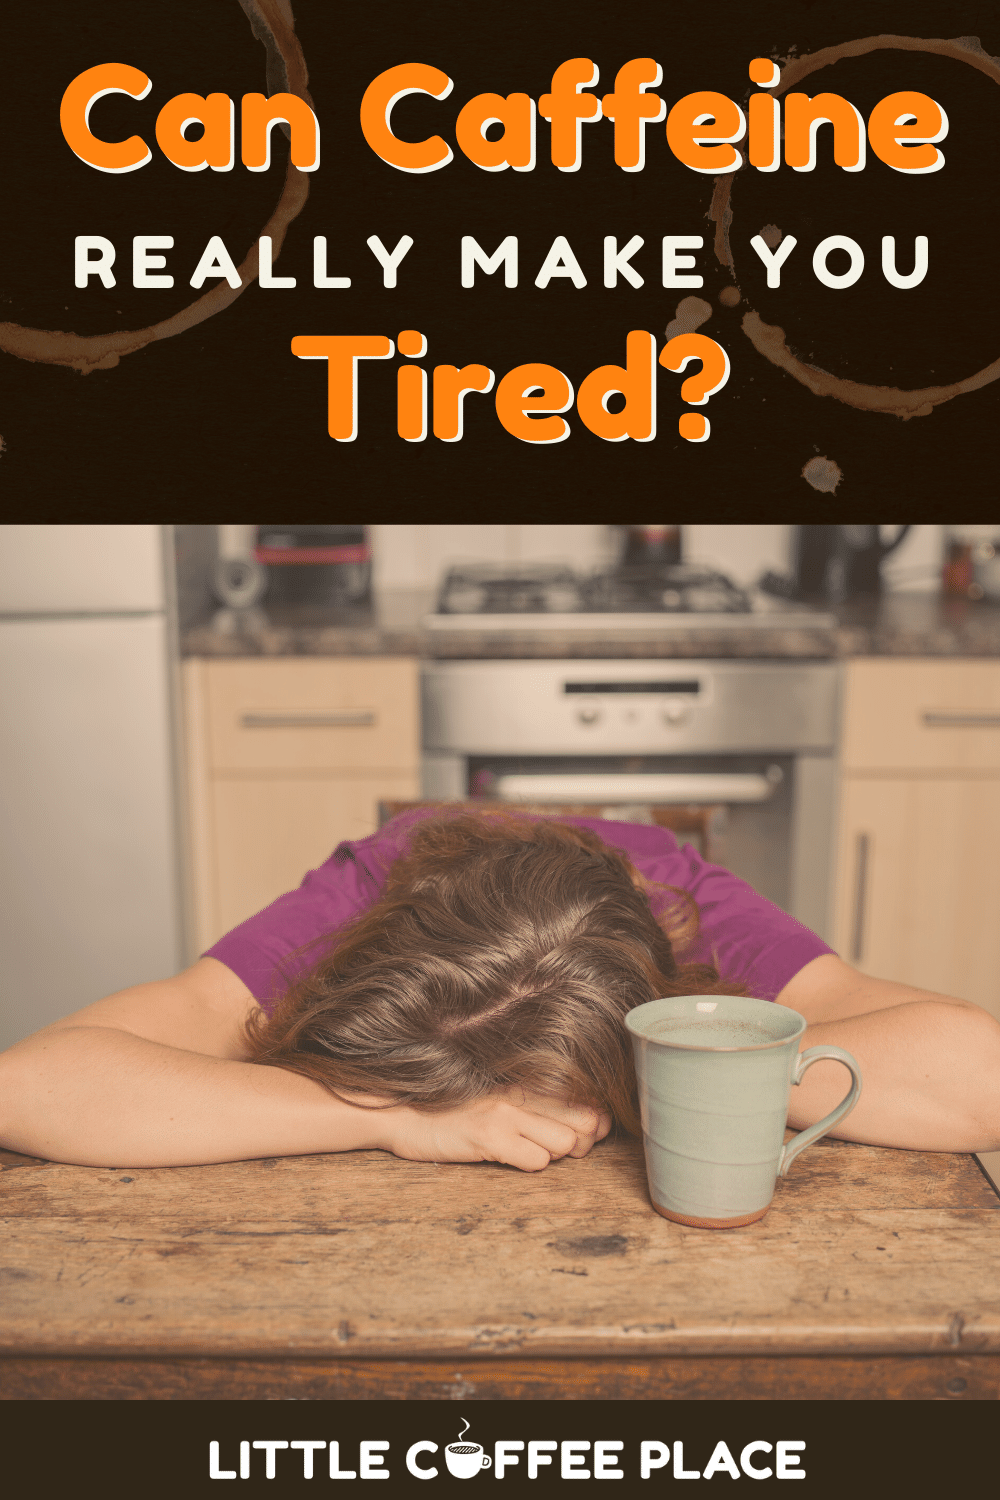 casounddesign: Why Does Arthritis Make You So Tired